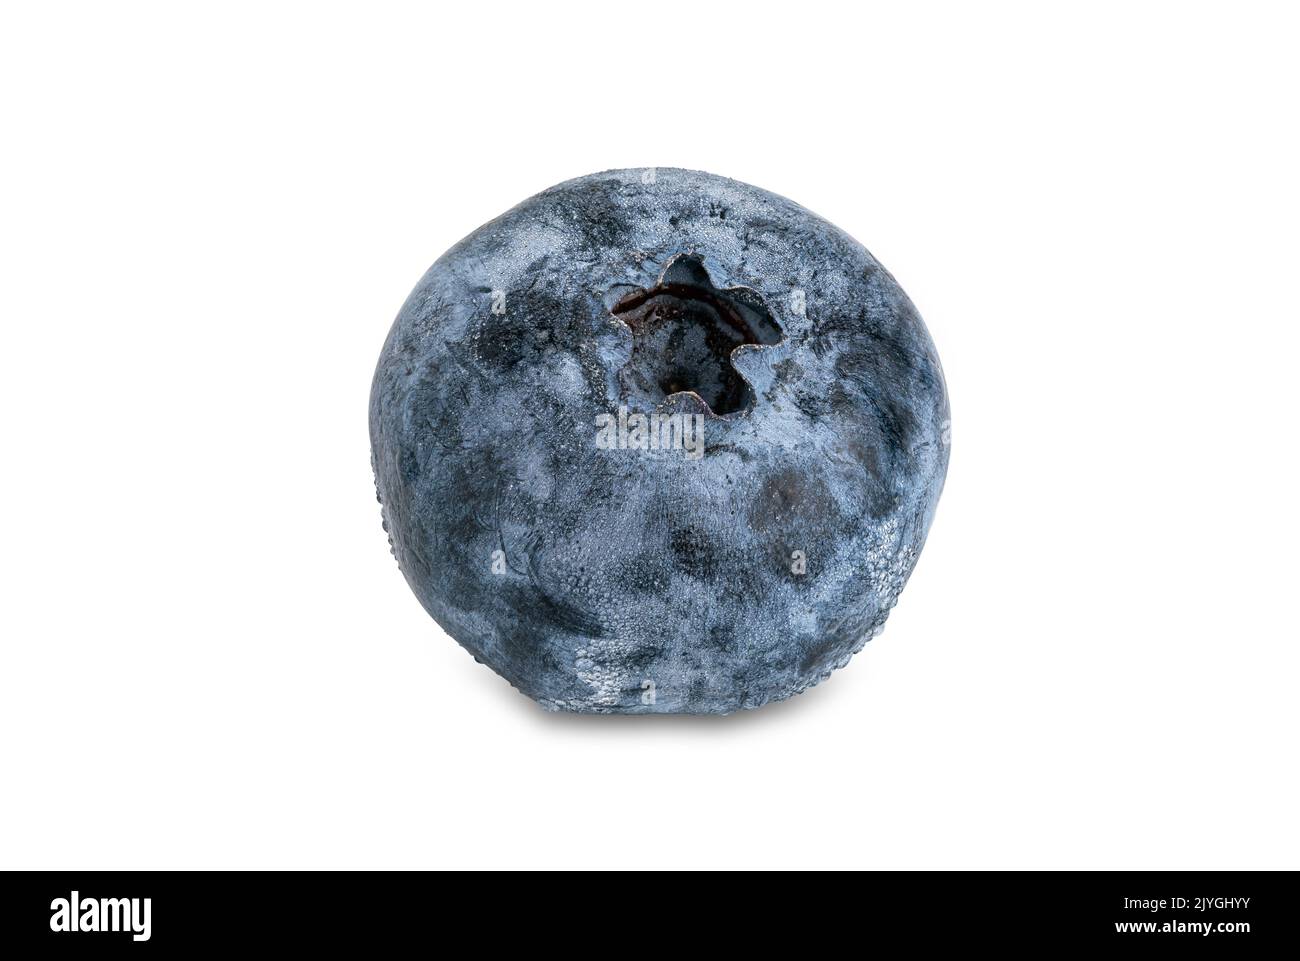 High angle view single ripe delicious blueberry isolated on white background with clipping path. Stock Photo